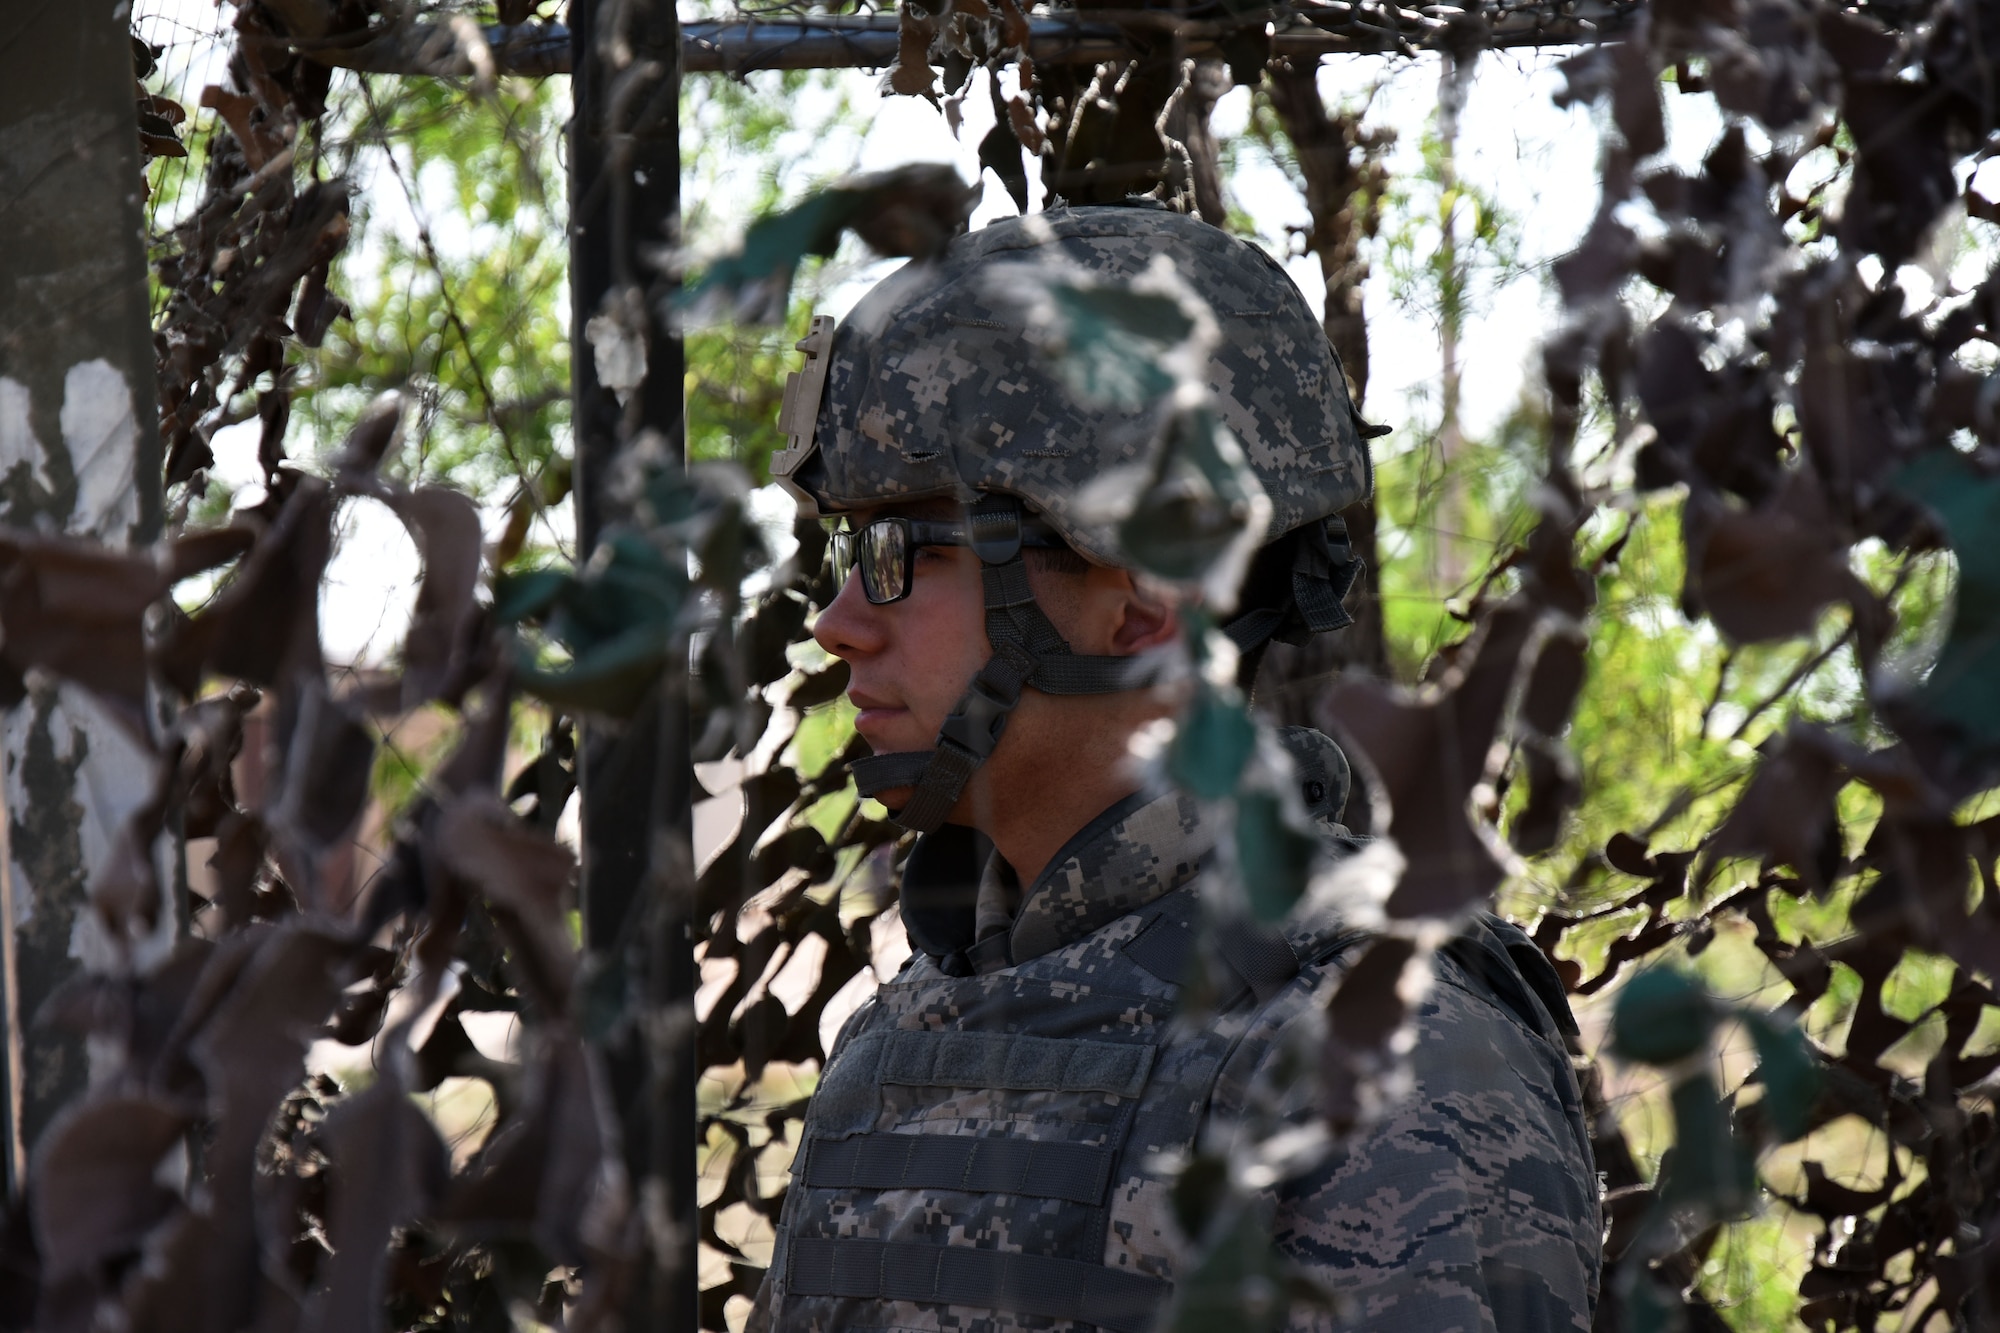 Michael Reyes, Angelo State University Air Force ROTC cadet, prepares for his shift as entry controller at the mock forward operating base on Goodfellow Air Force Base, Texas, April 21, 2018. The cadets were on rotating shifts of entry controller, guard tower and patrol. (U.S. Air Force photo by Airman 1st Class Seraiah Hines/Released)